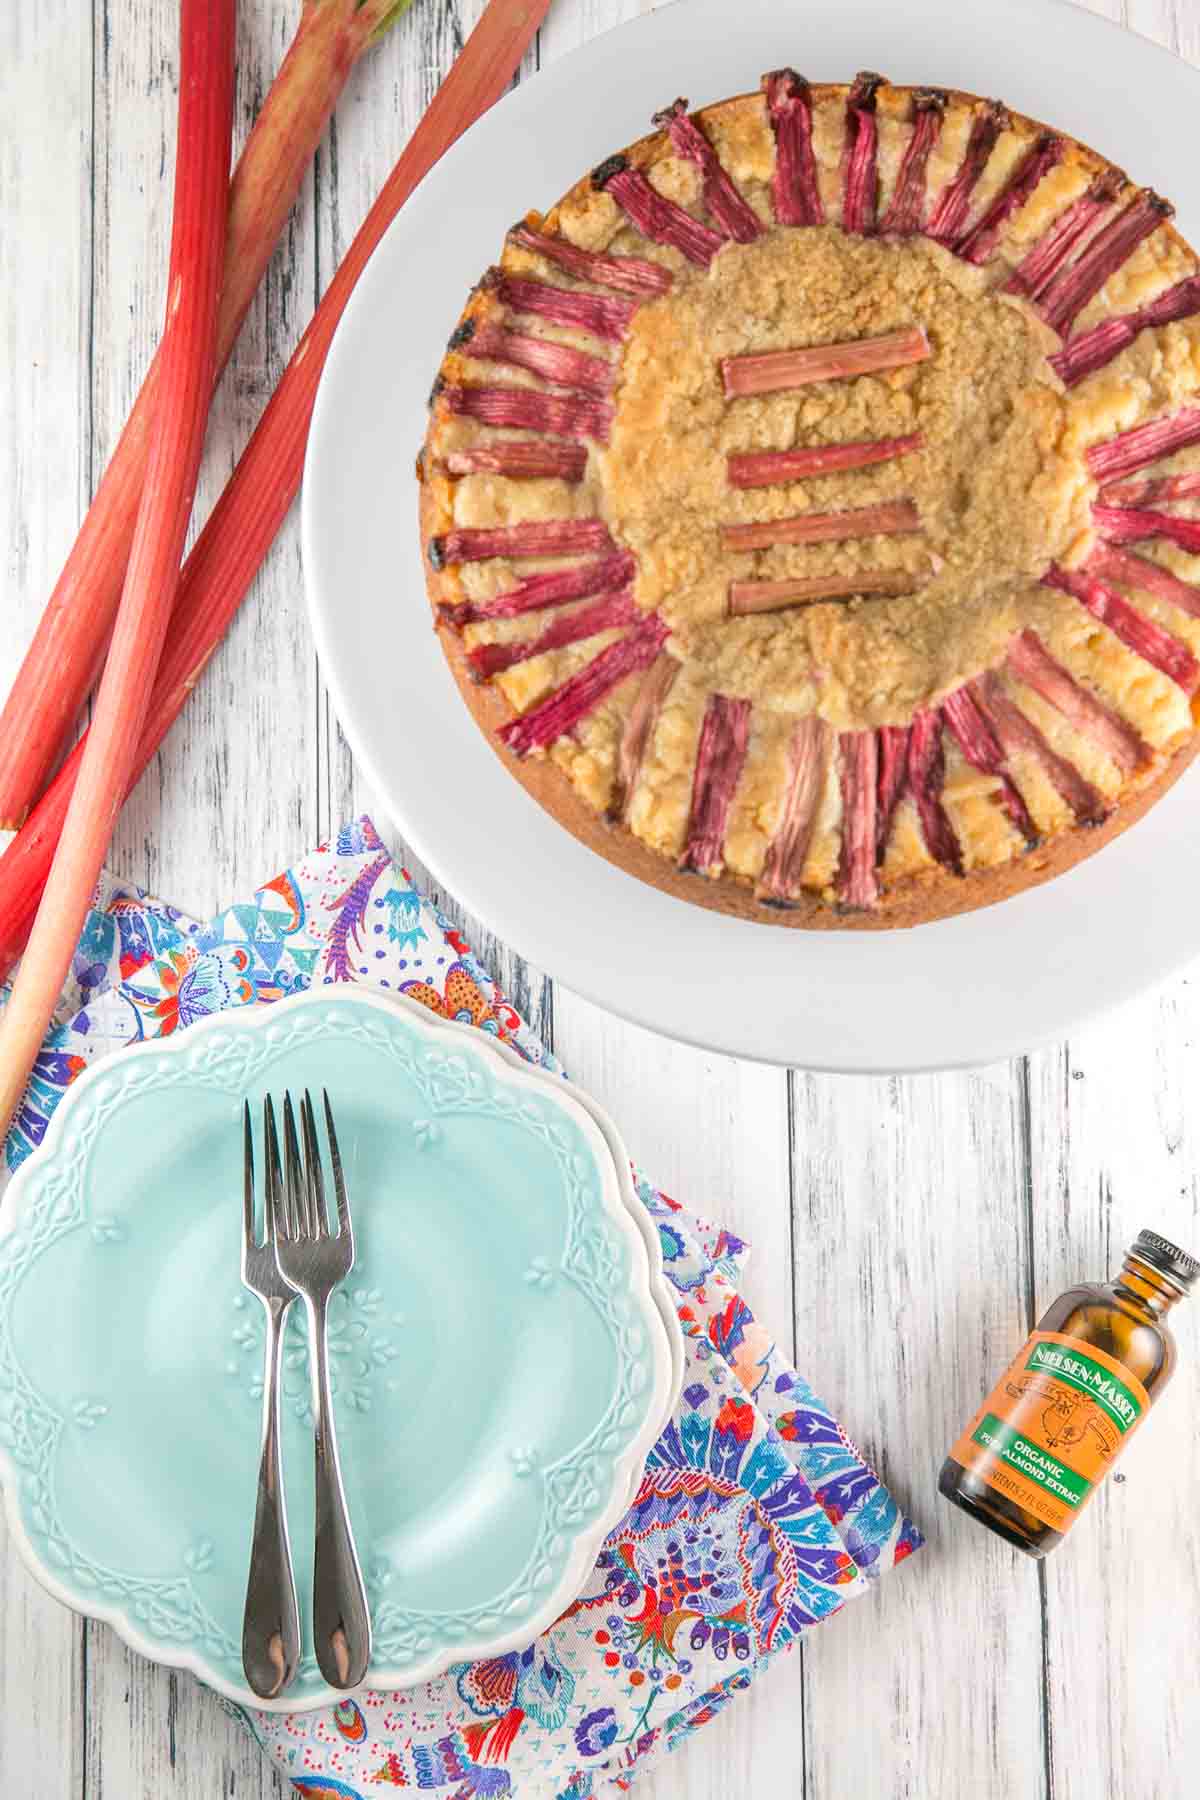 Almond Rhubarb Cake: a light and fluffy almond cake filled with sliced rhubarb. Top with ice cream and rhubarb syrup for an extra treat! {Bunsen Burner Bakery} [ad] #rhubarb #almond #cake #coffeecake